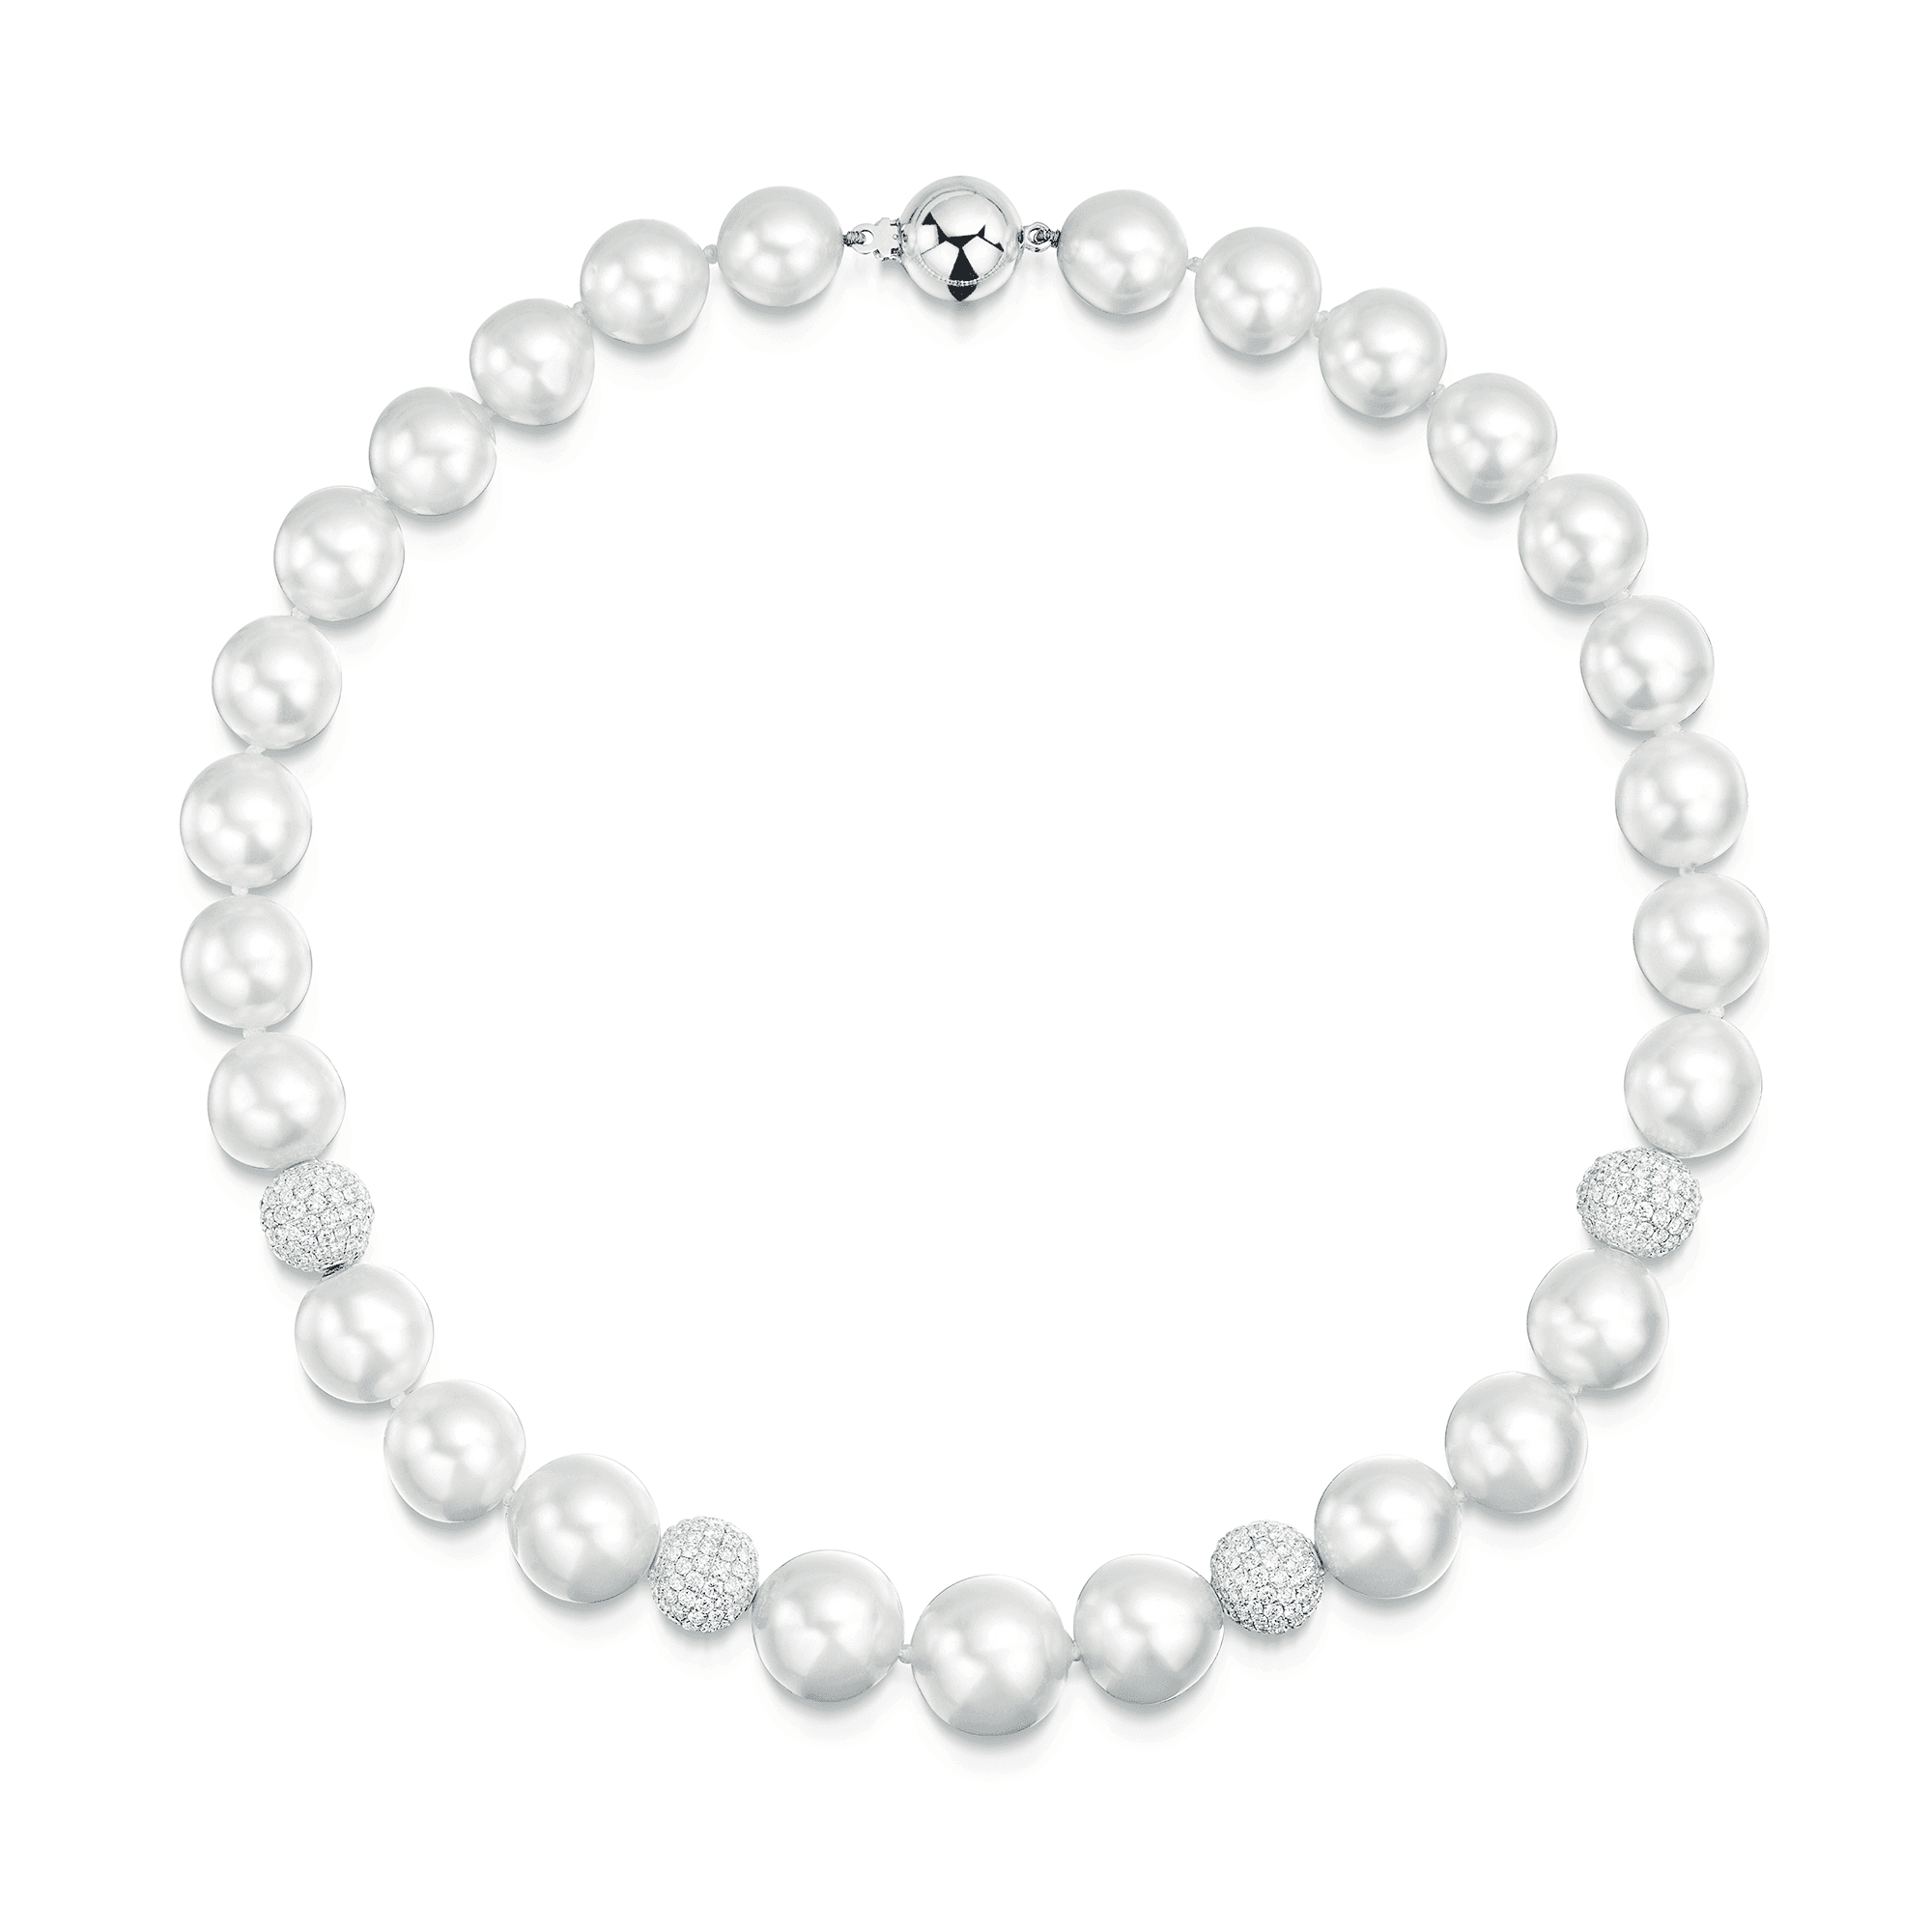 18ct White Gold Graduated South Sea Pearl Necklet With Set Pave Set Diamond Spheres